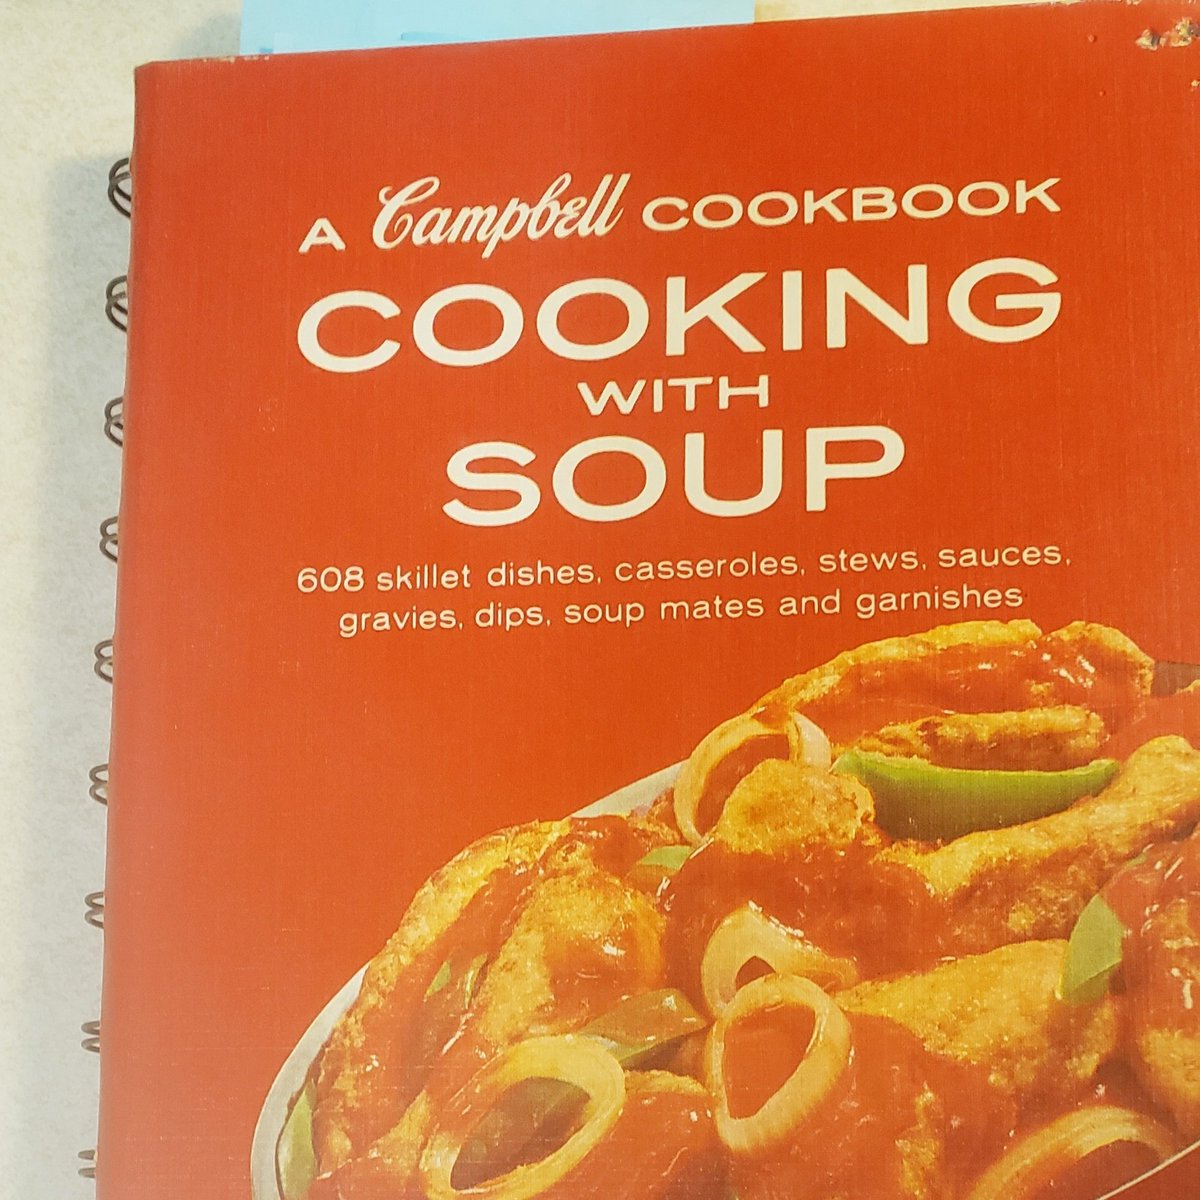 Hey good-lookin', whatcha got cookin', how'sabout cookin' something up with me and my Cooking with Soup Cookbook  #YeOldenTimeCooking